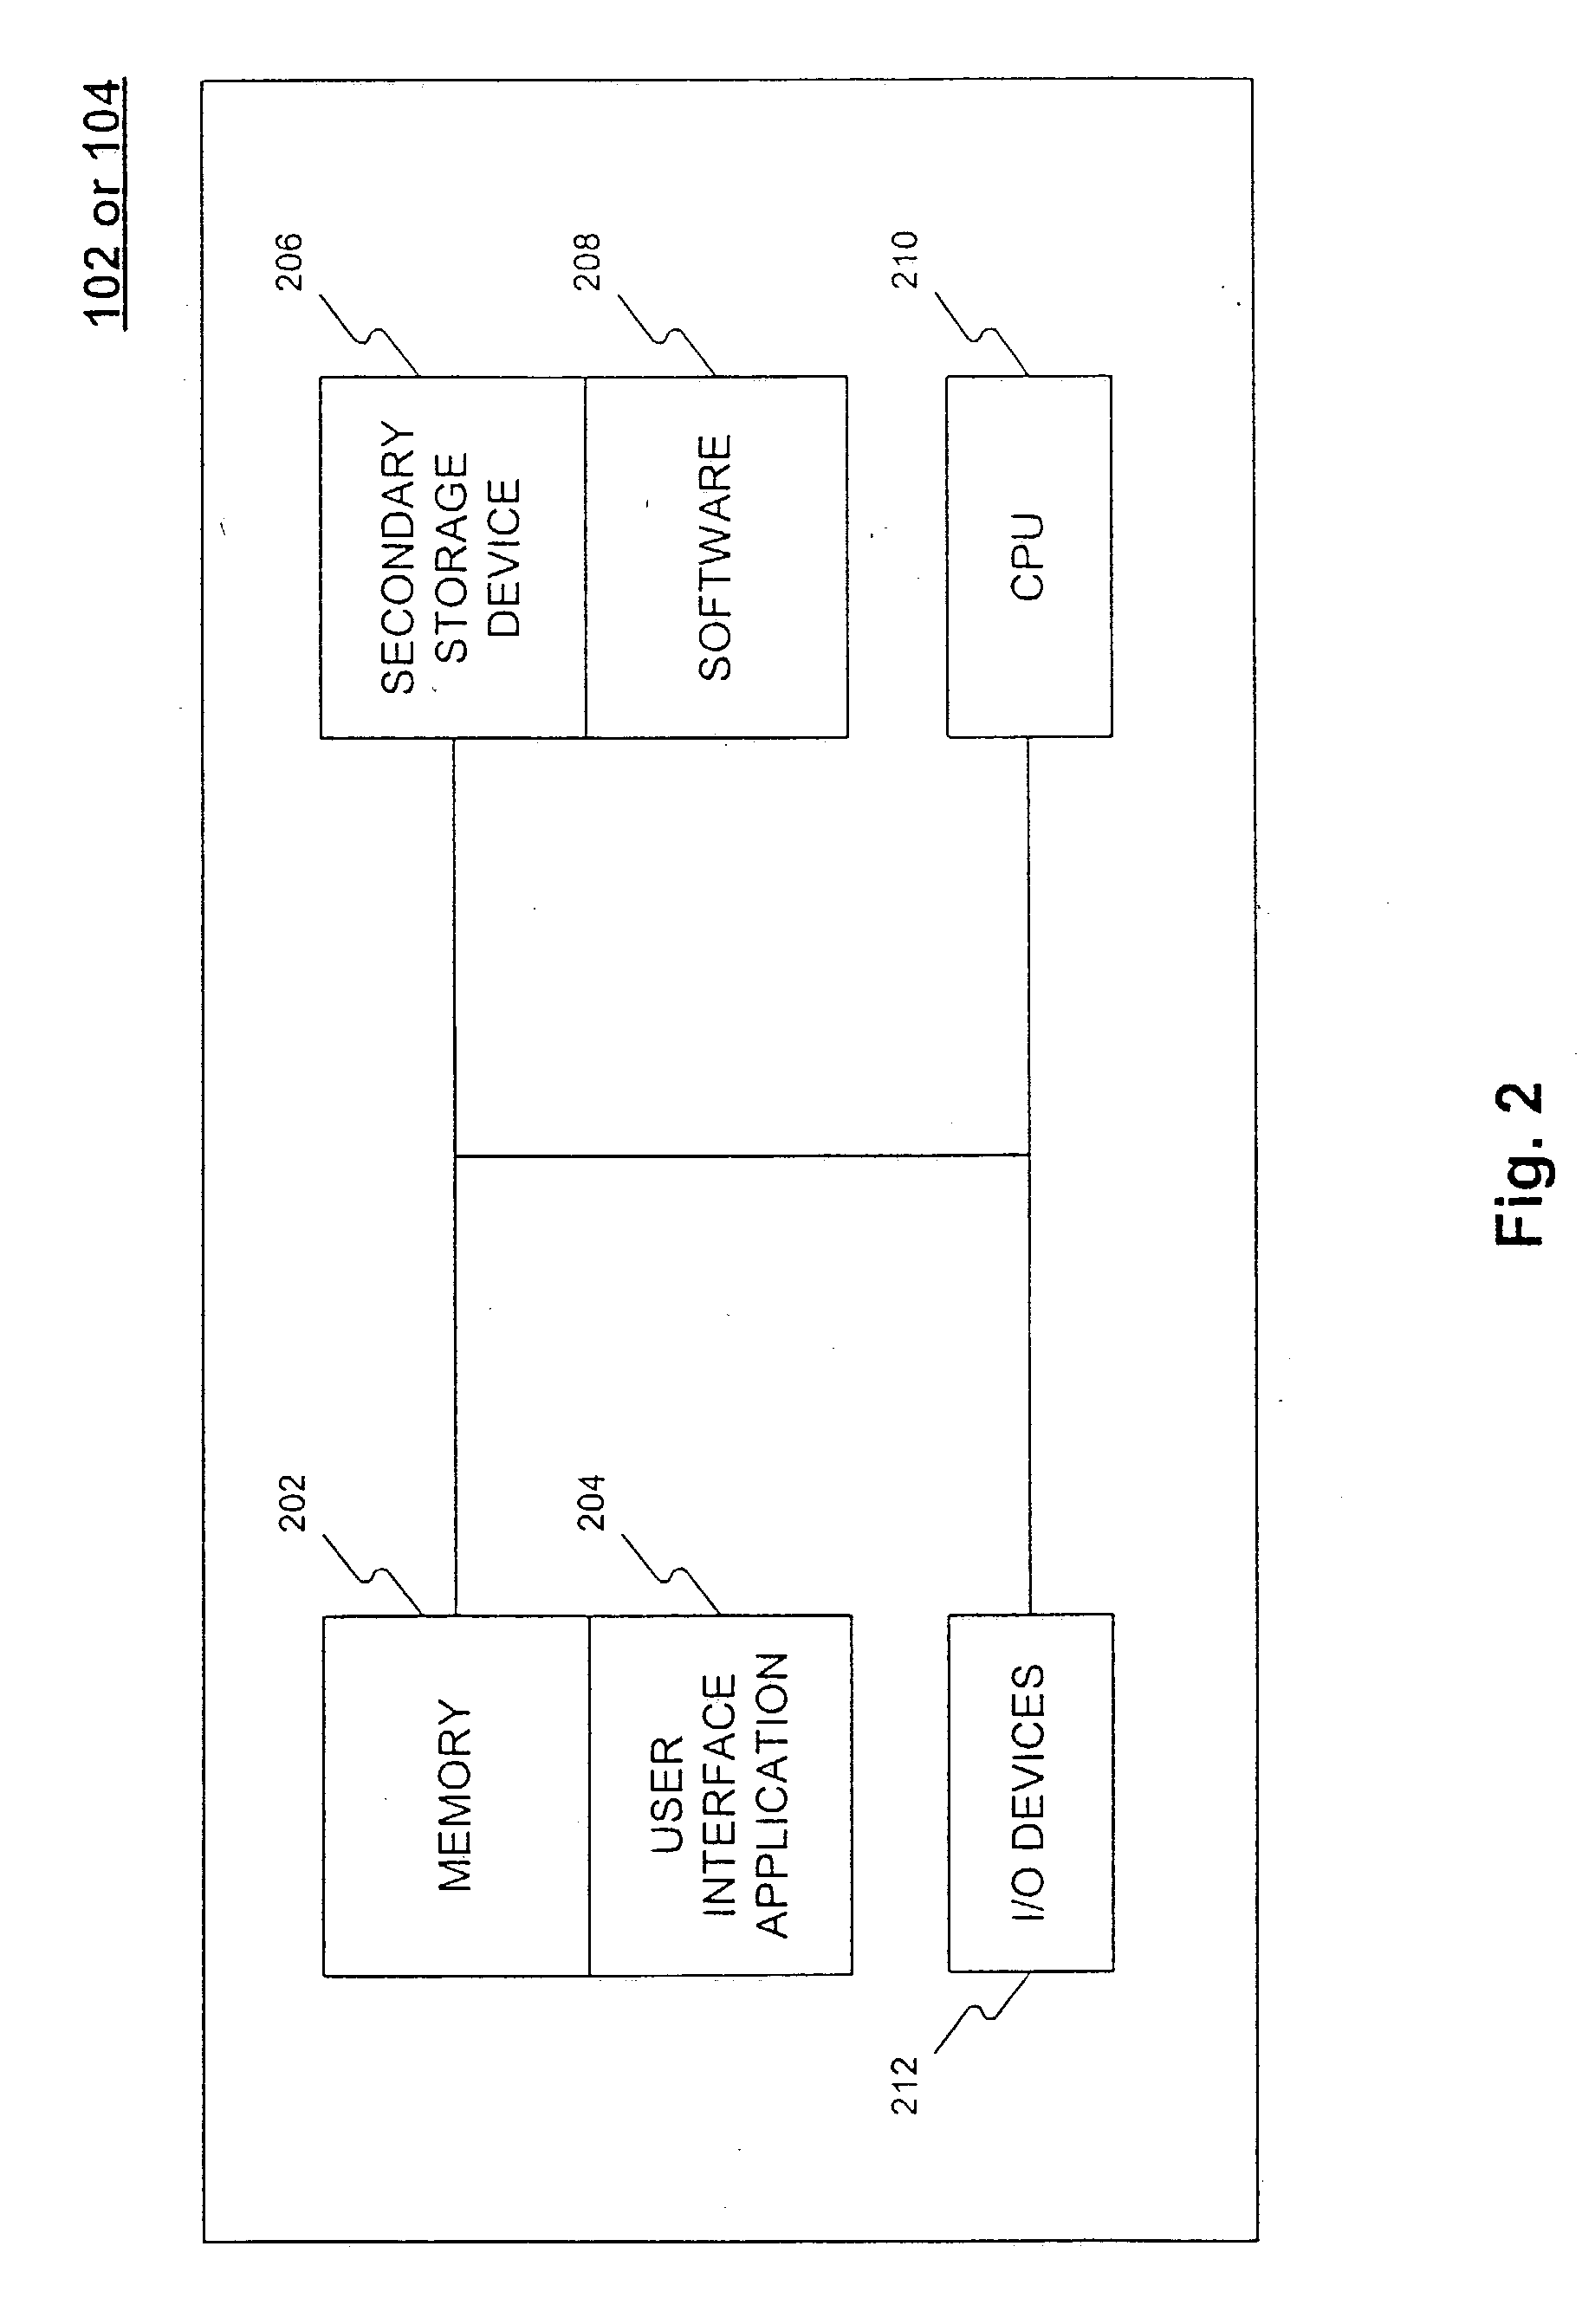 Systems and methods for providing and accessing advice over a network